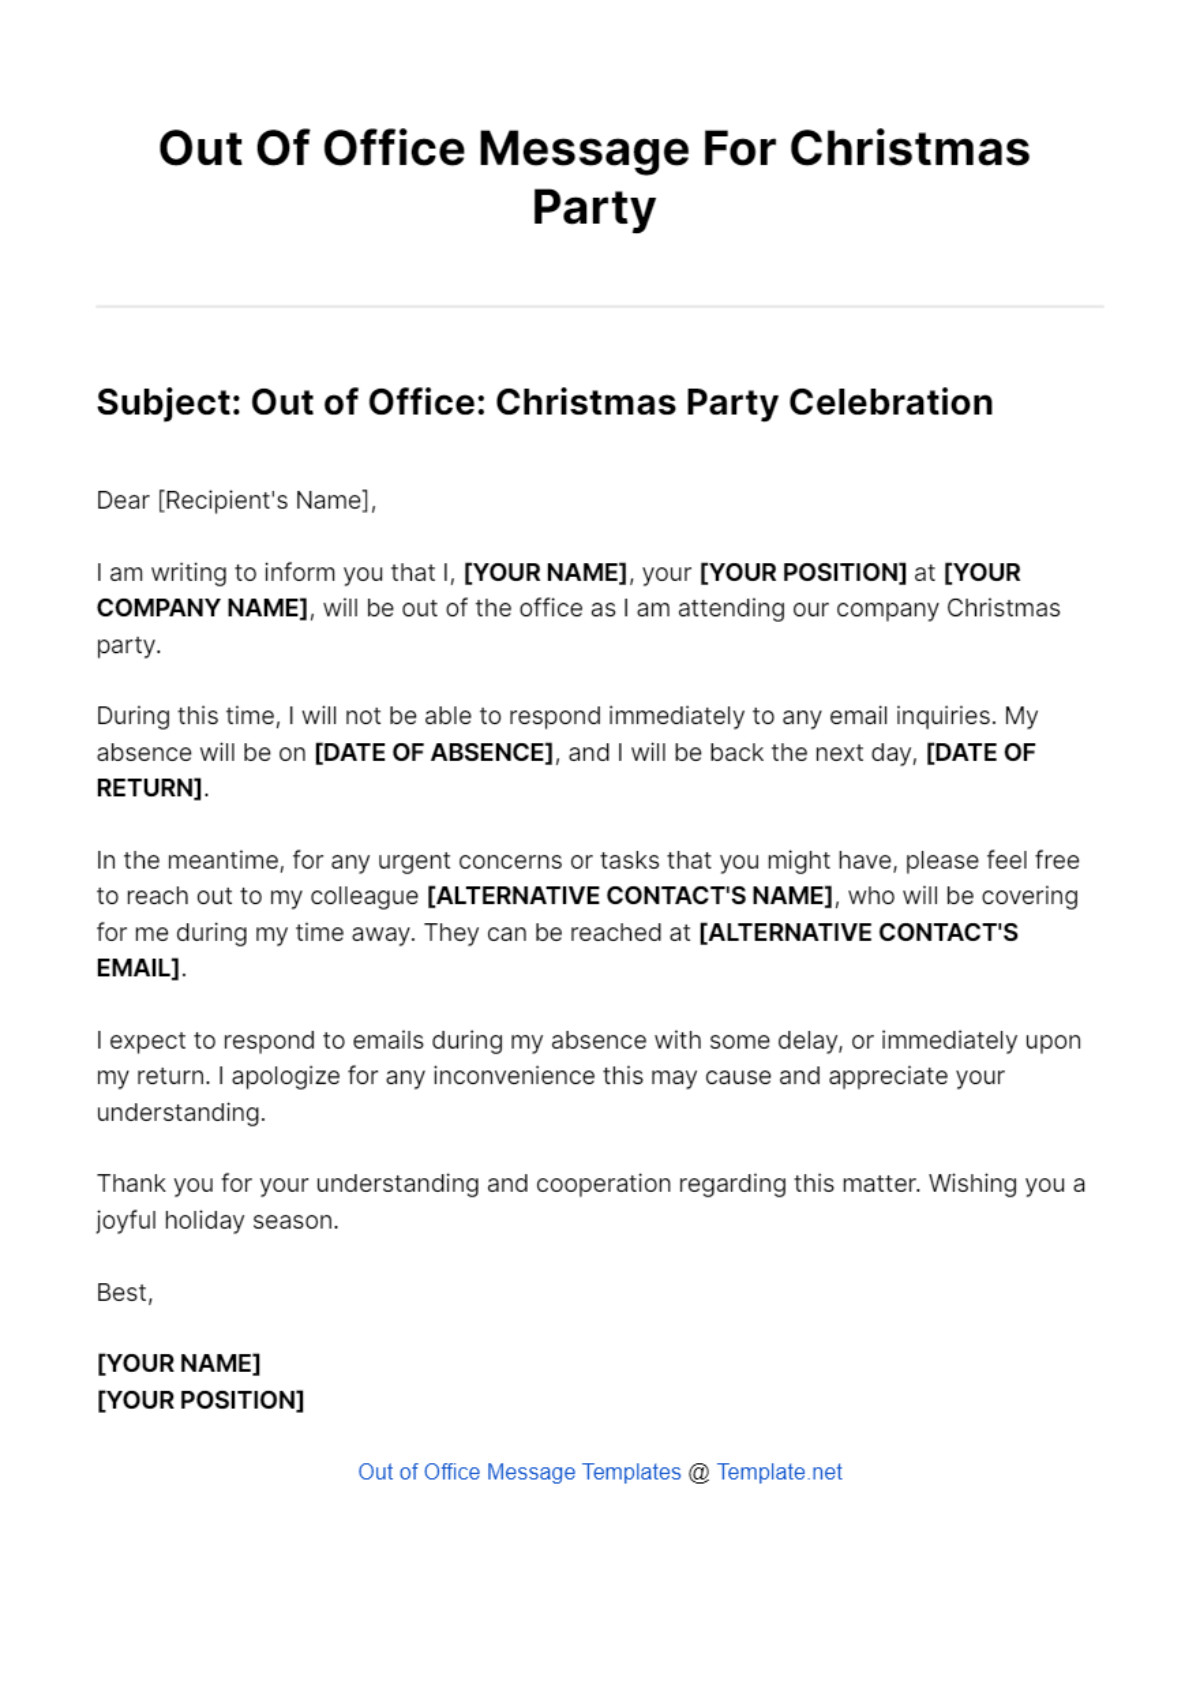 Free Out Of Office Message For Christmas Party Template